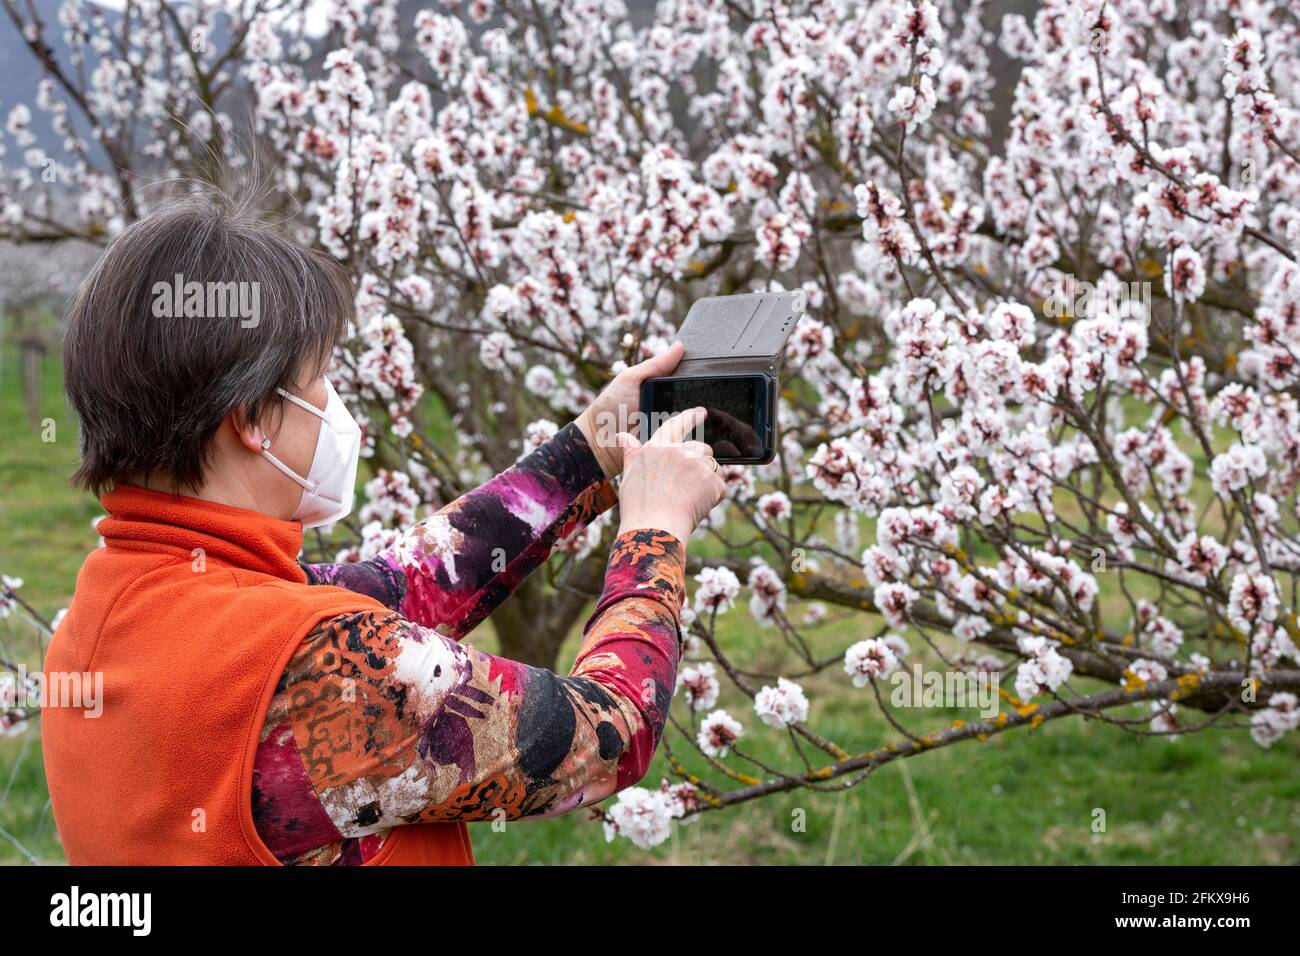 Tourist Photographs Apricot Blossom With Smartphone In The Wachau Lower Austria Stock Photo